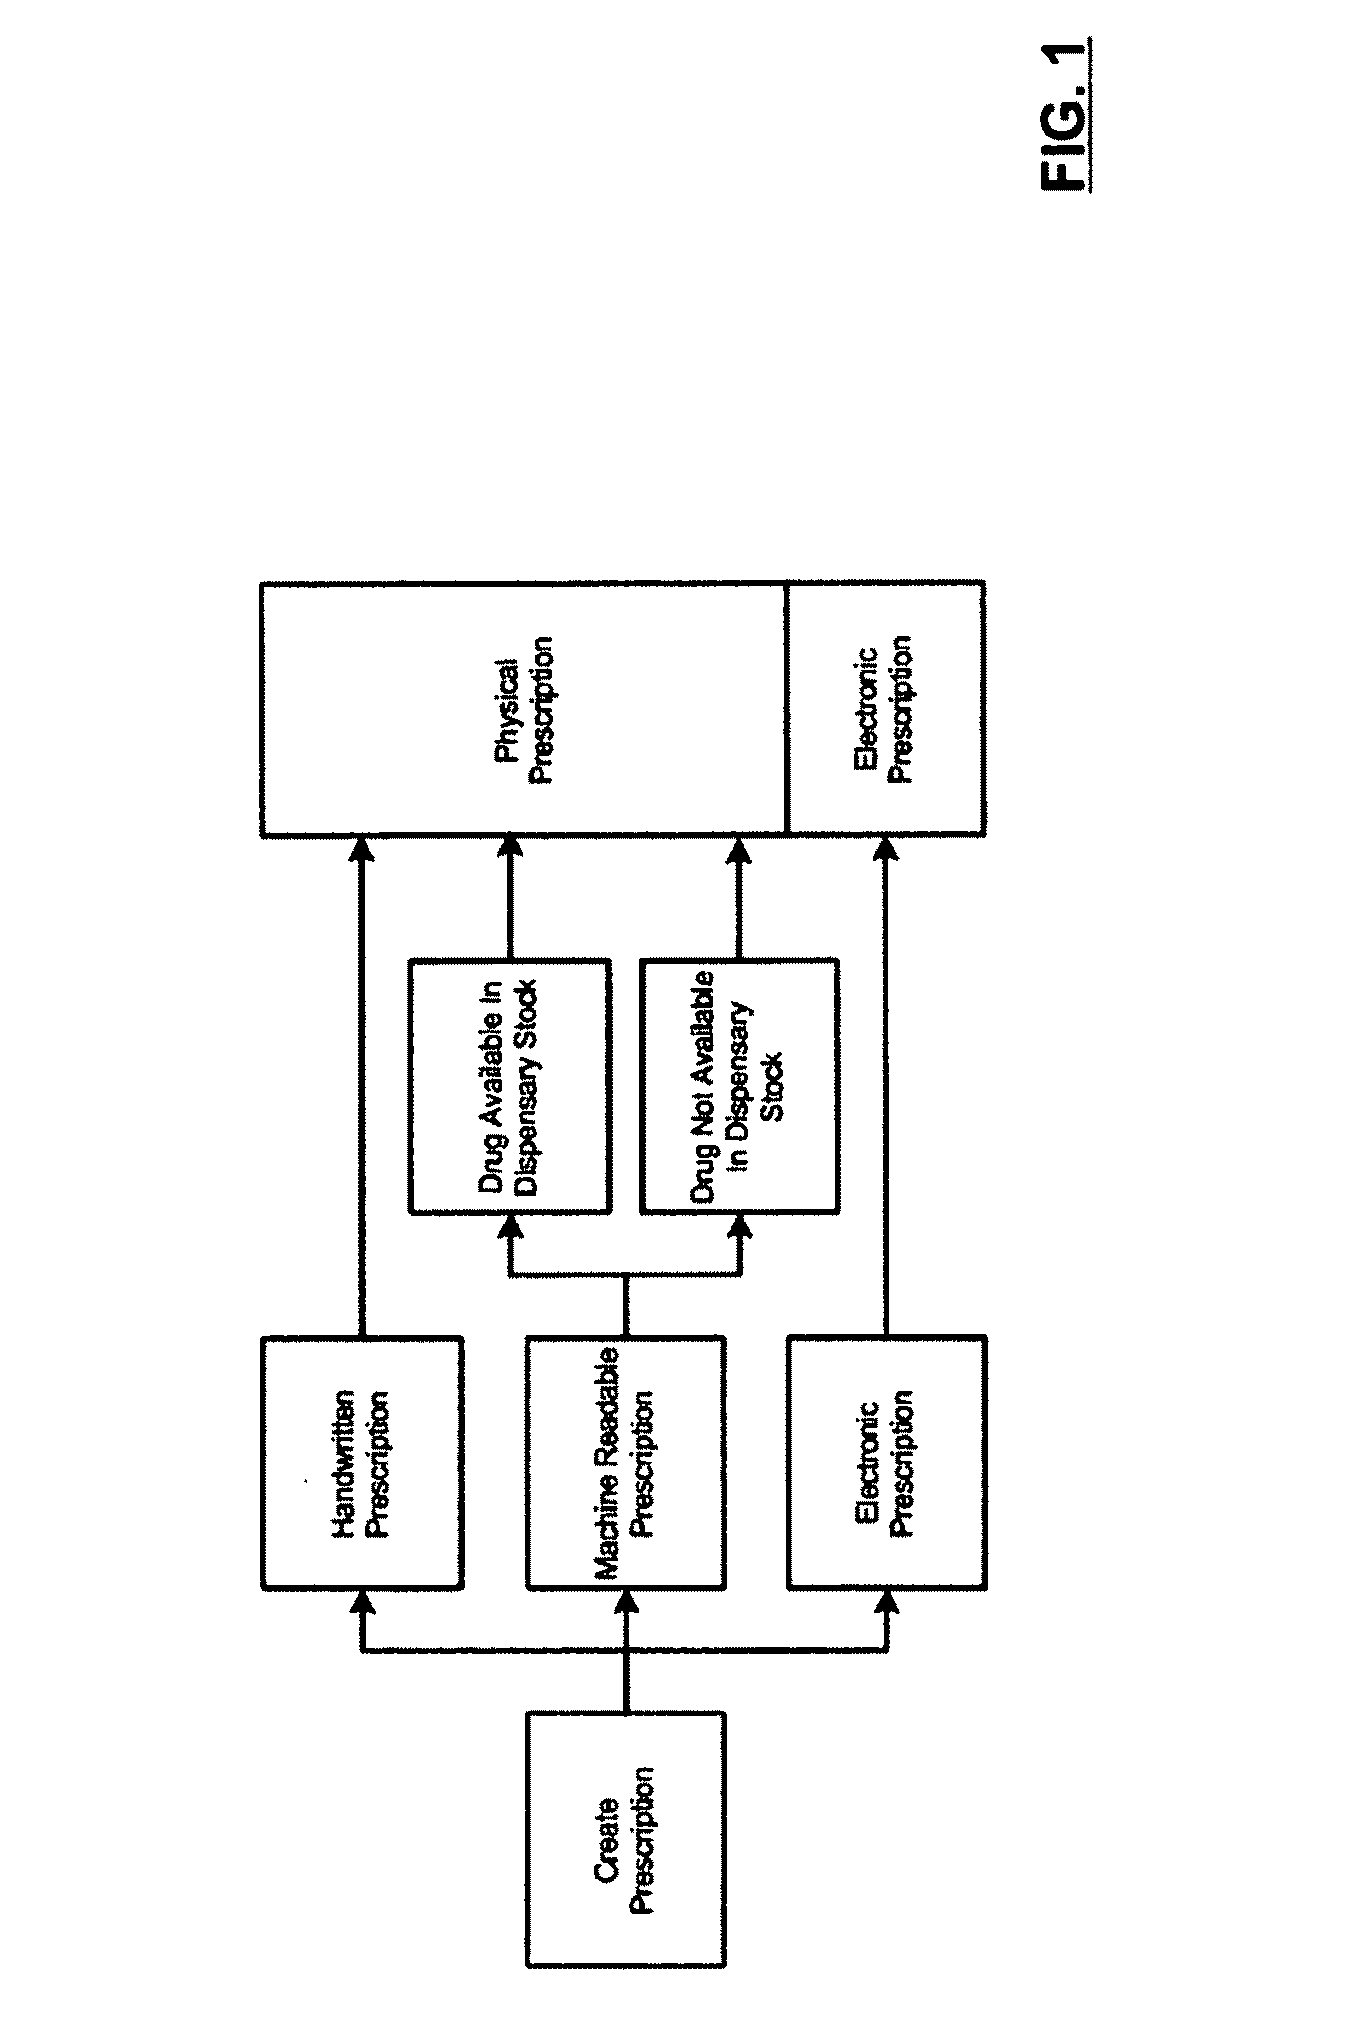 Method, system and apparatus for dispensing drugs